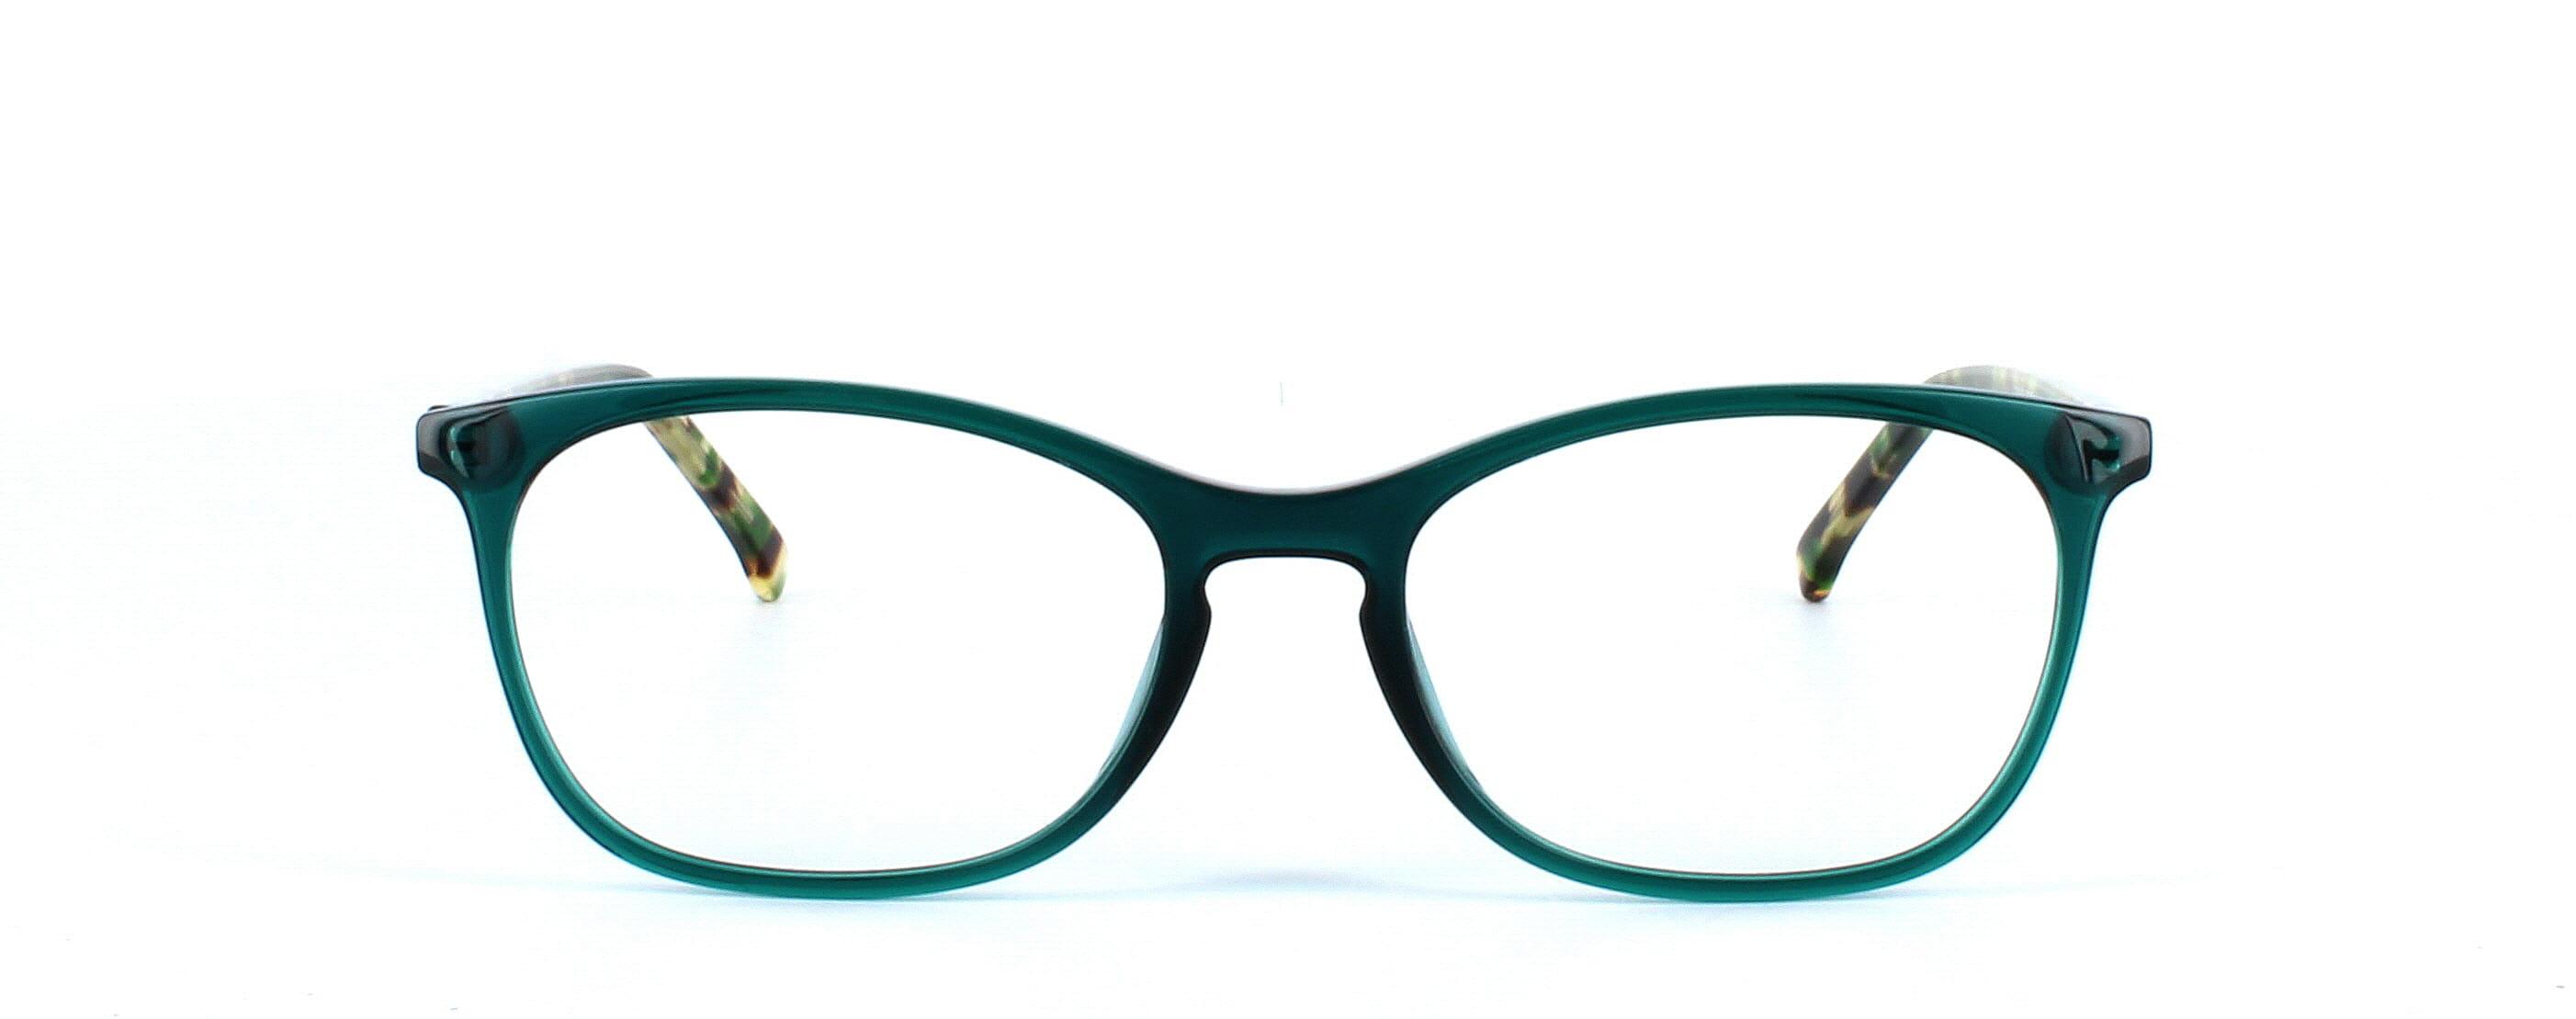 Hackleton - Ladies crystal green plastic glasses with mottled sprung hinge arms - image view 15